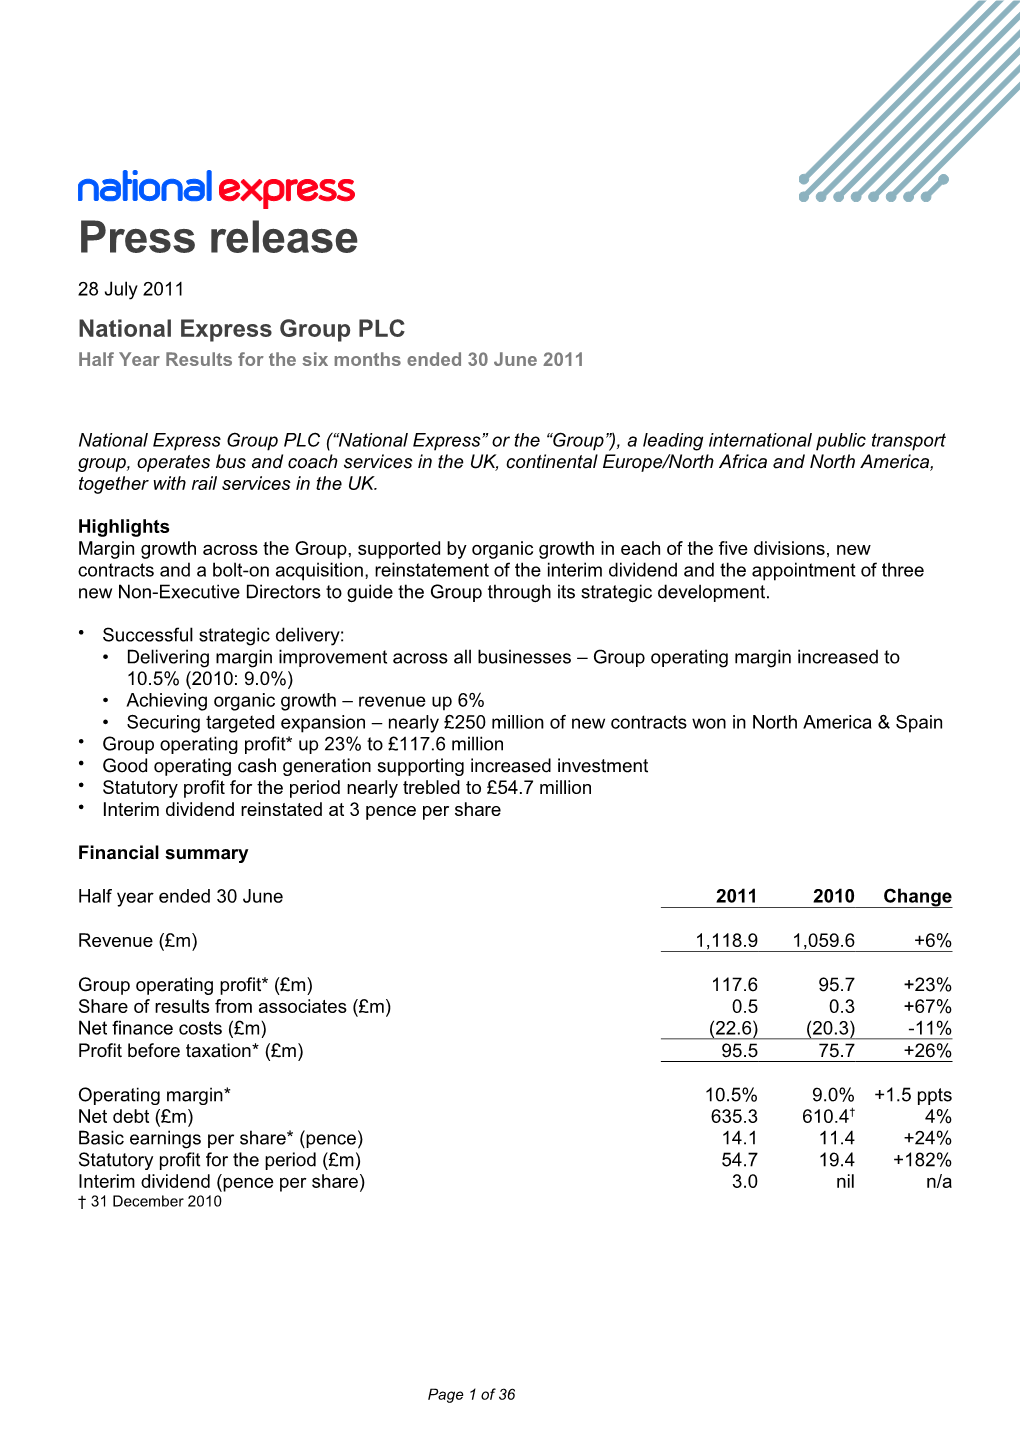 National Express Group PLC Half Year Results for the Six Months Ended 30 June 2011